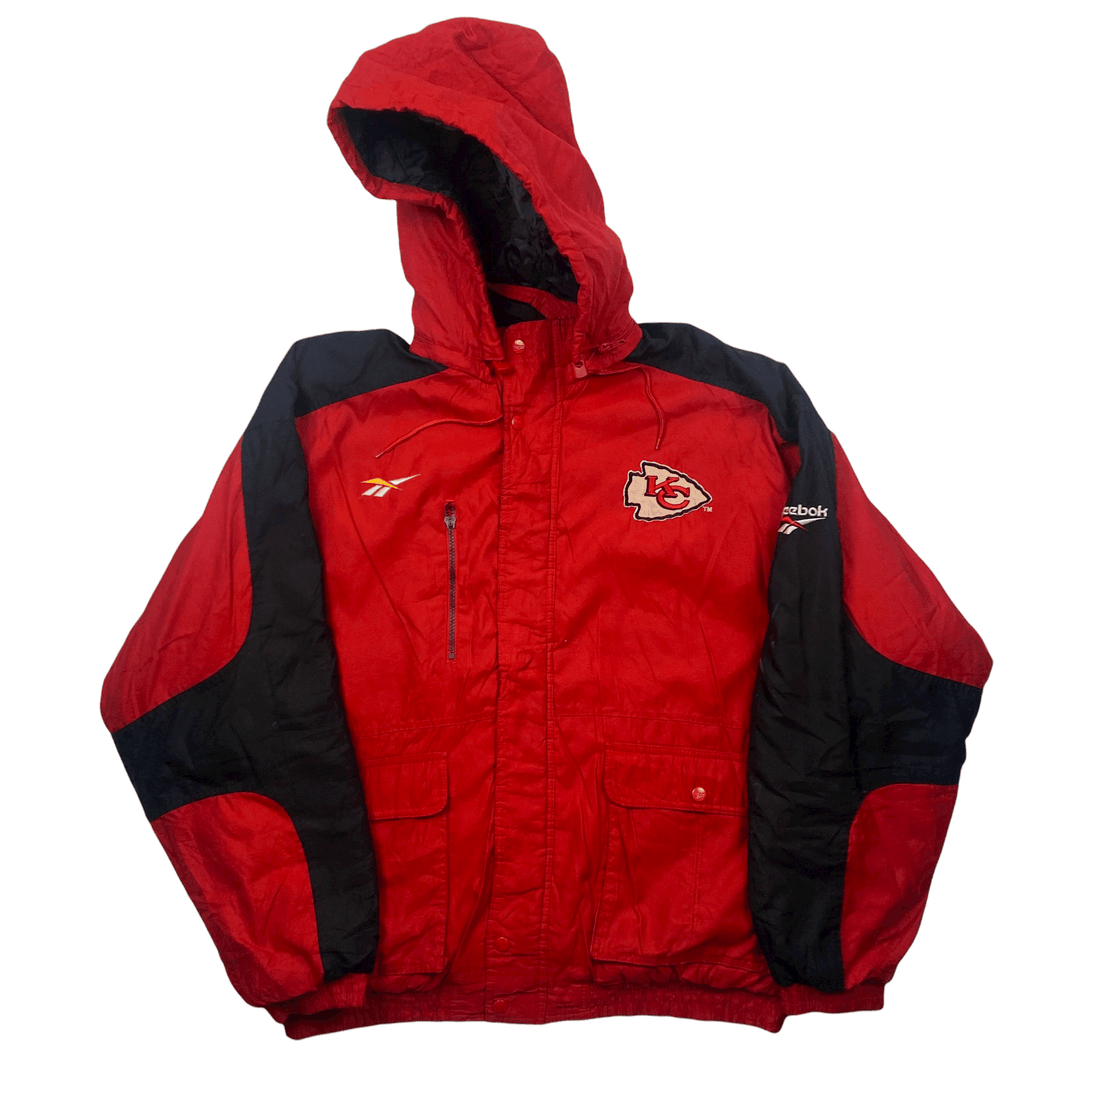 Vintage Red + Black Reebok NFL Pro Line Kansas City Chiefs Large Logo Spell-Out Jacket - Extra Large - The Streetwear Studio